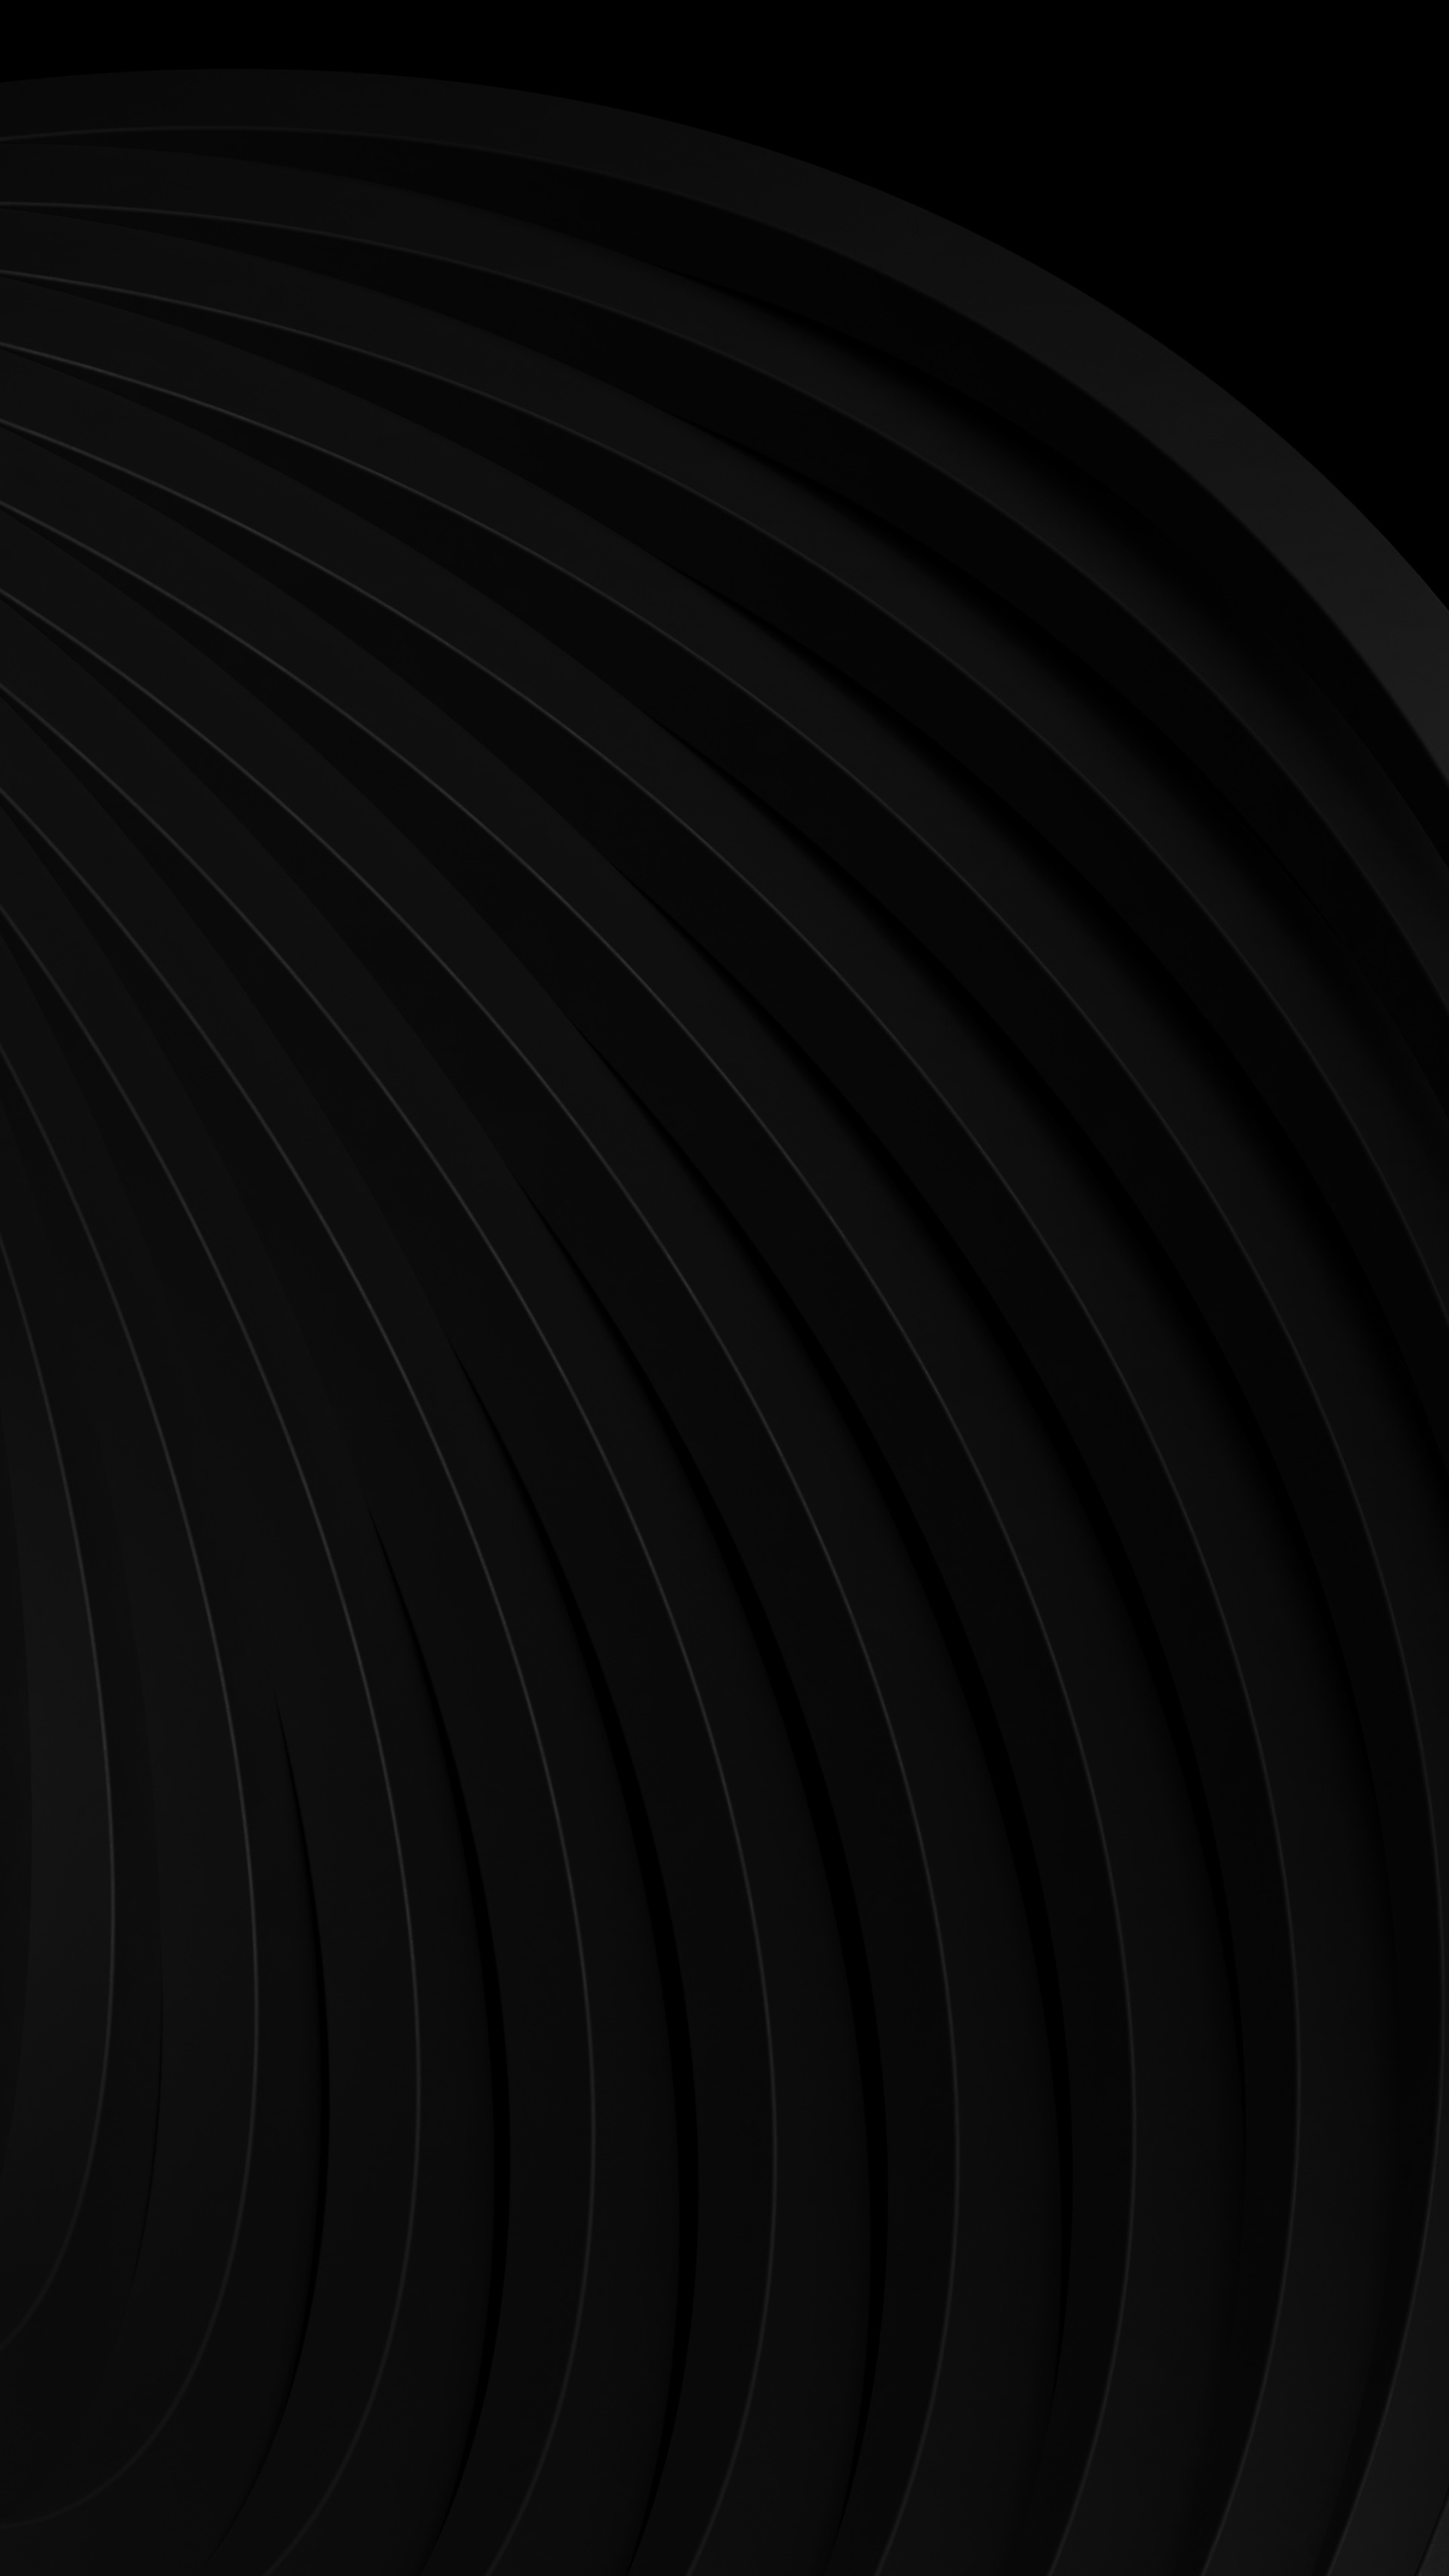 Free abstract backgrounds - Deep Darkness on Behance